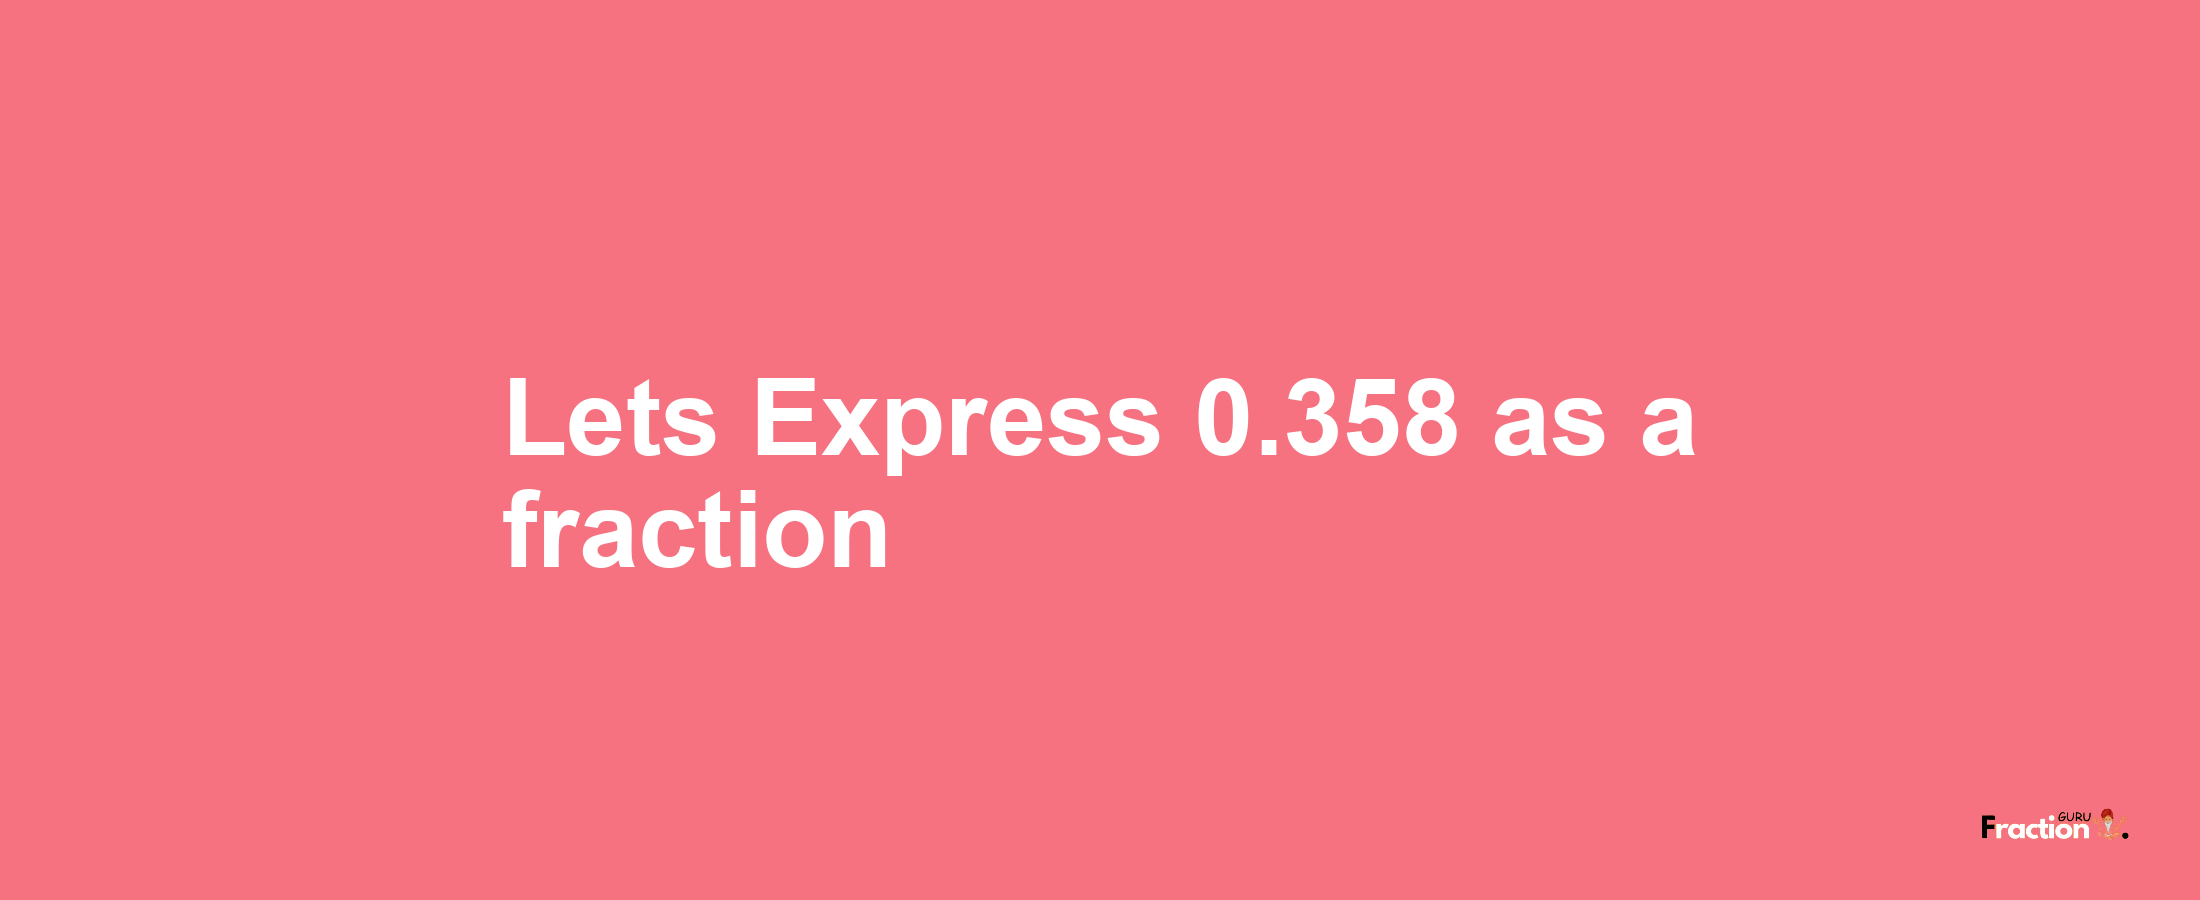 Lets Express 0.358 as afraction